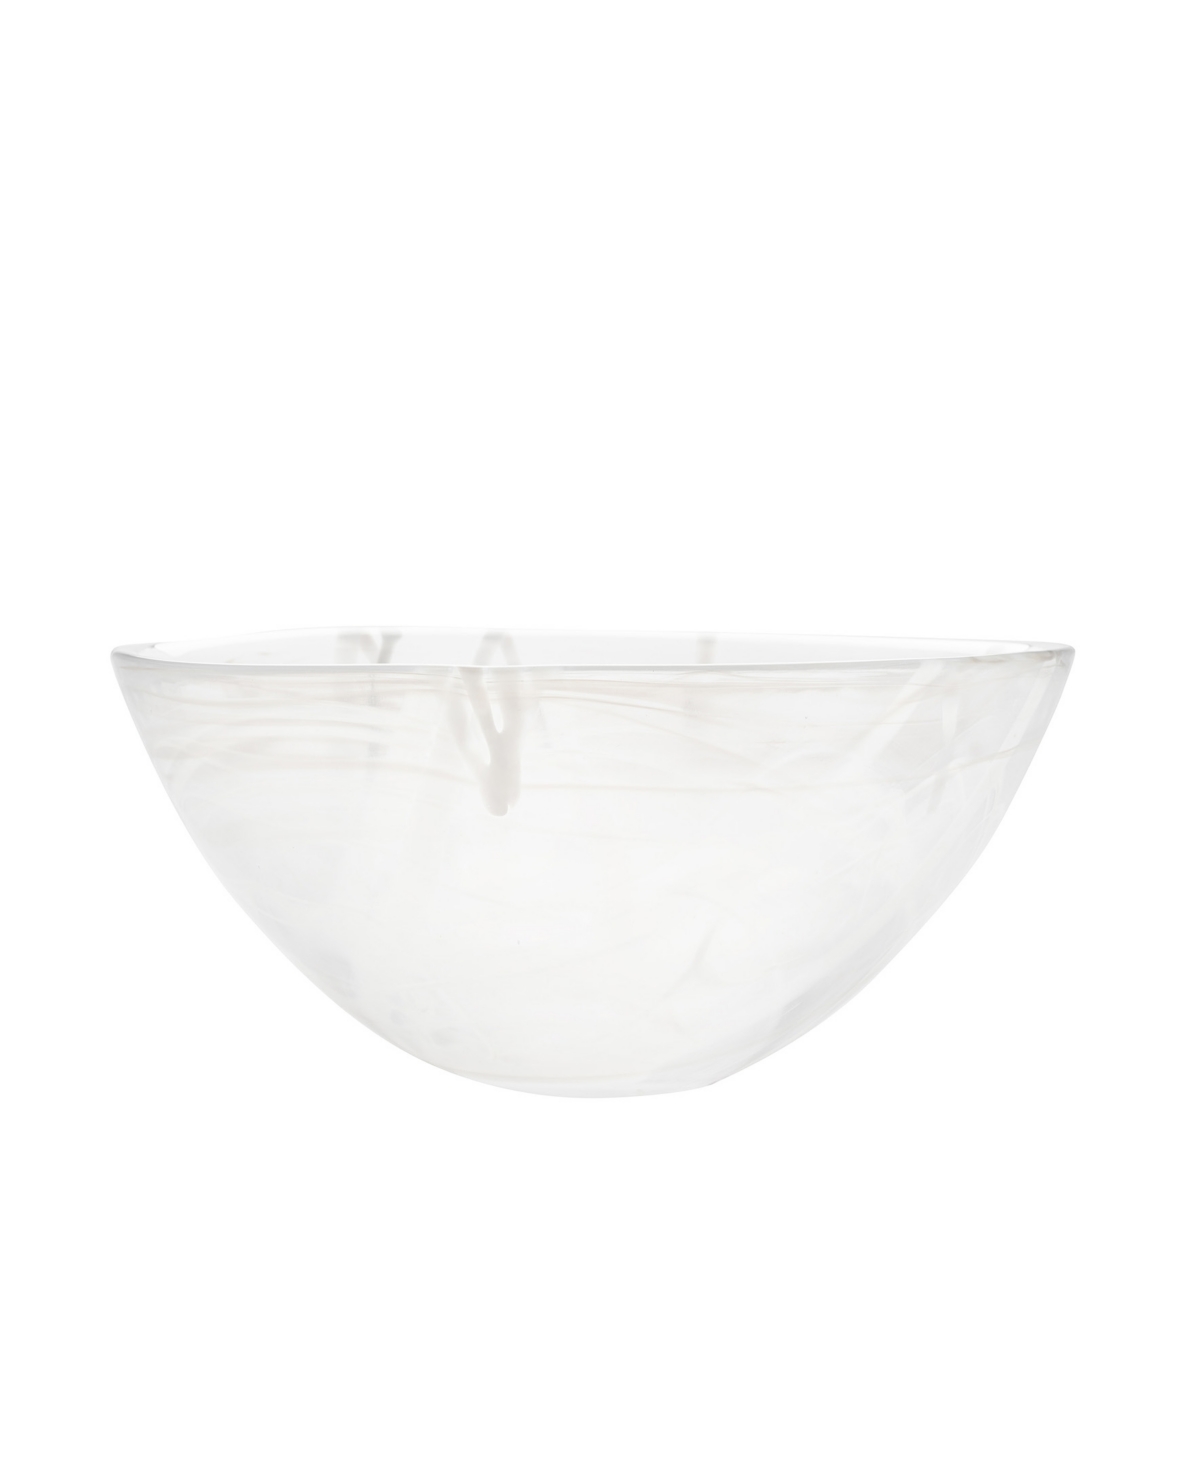 Contrast Large Bowl - White